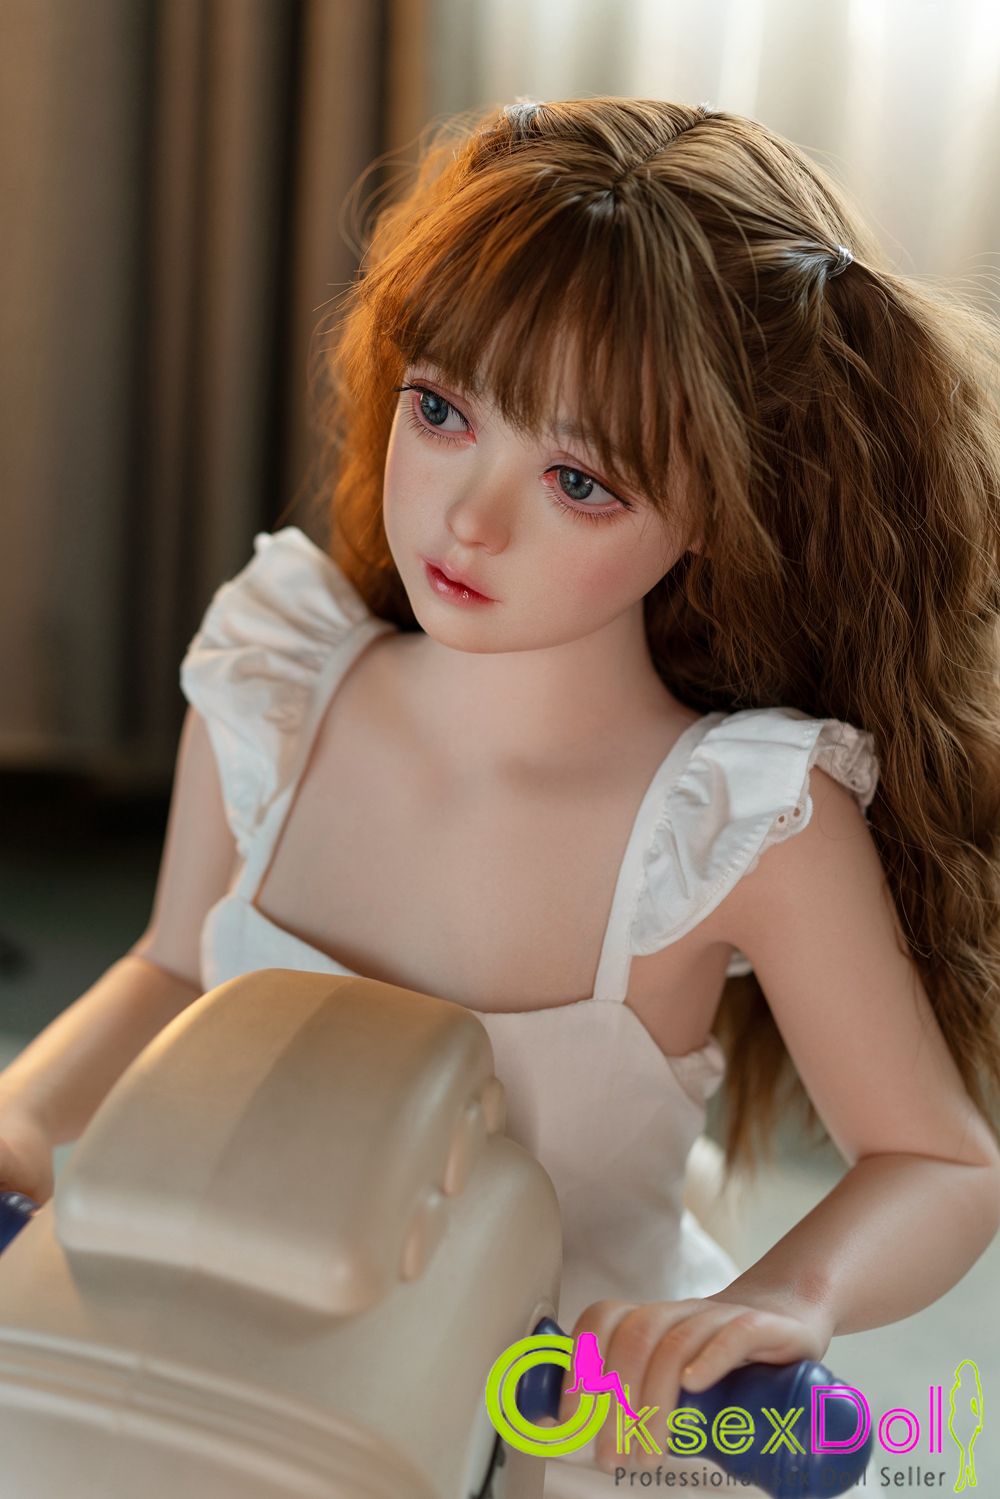 beautiful Chested real doll Photos